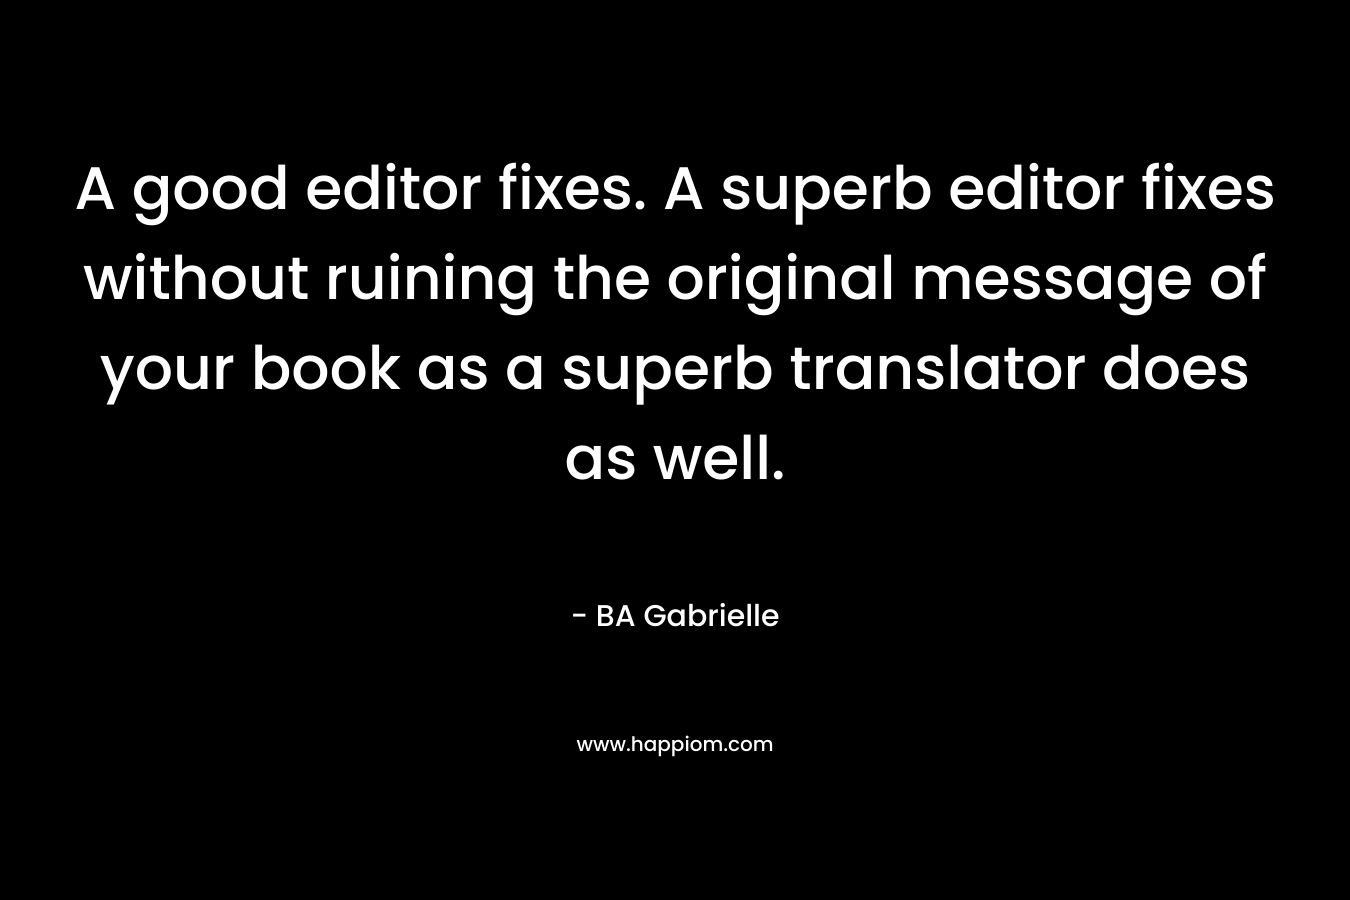 A good editor fixes. A superb editor fixes without ruining the original message of your book as a superb translator does as well. – BA Gabrielle